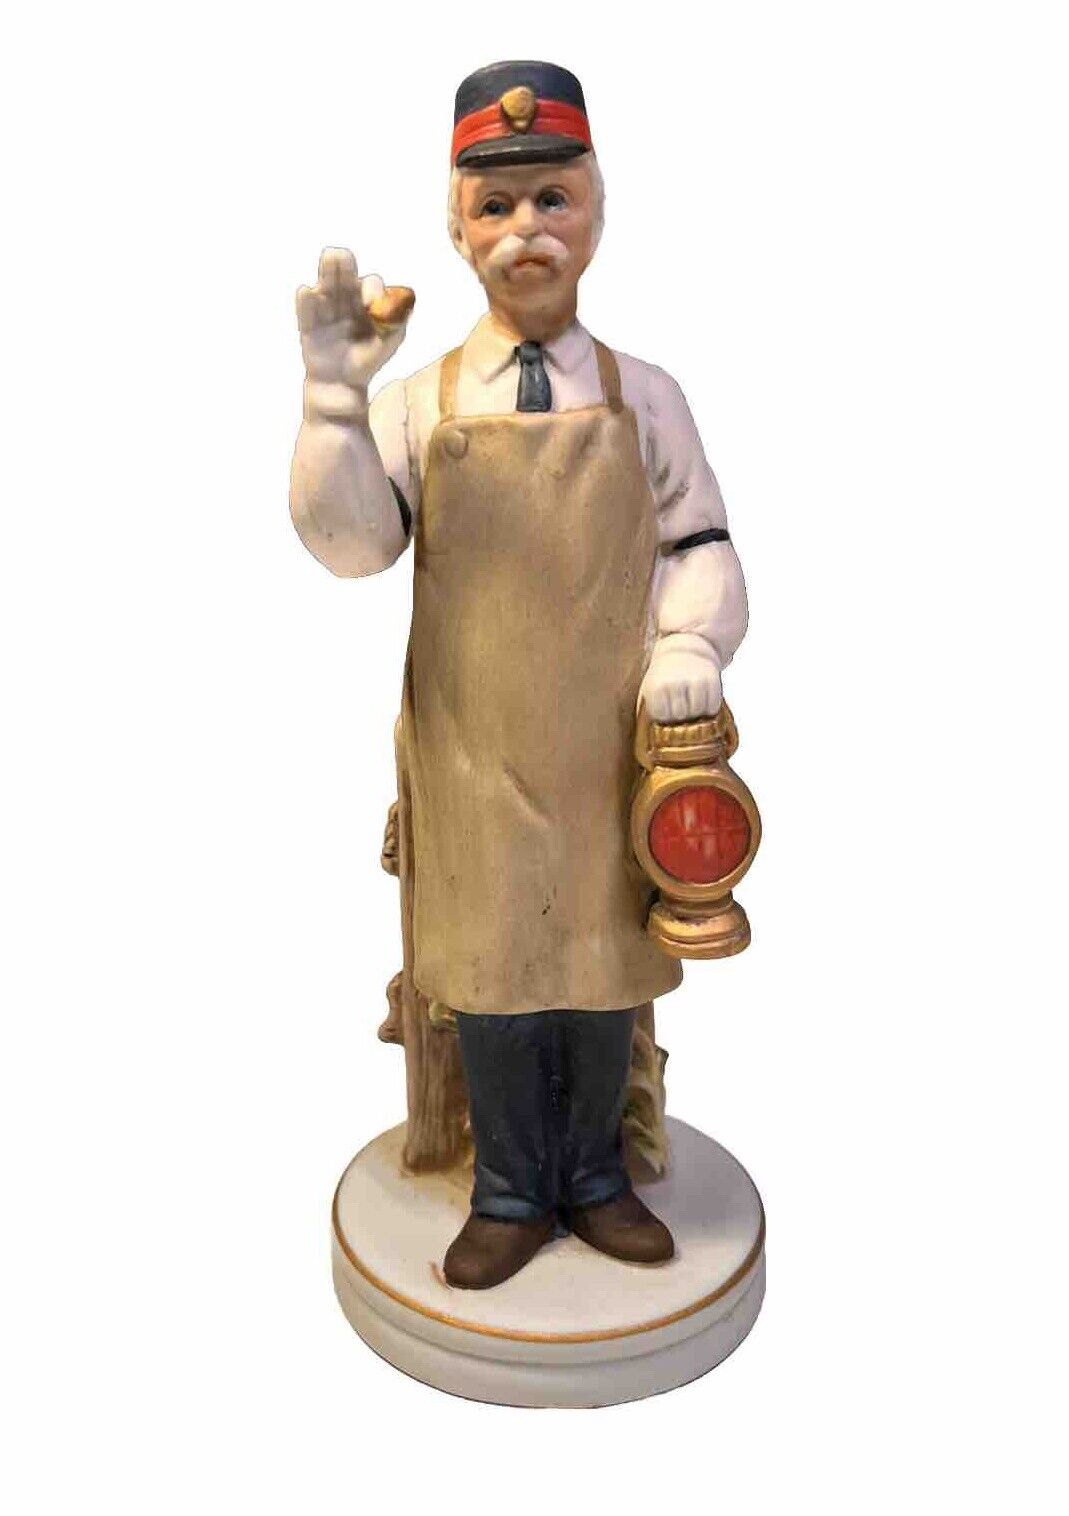 Vintage Inarco Train Railroad Conductor Holding Lamp And Whistle E-4511 Vintage